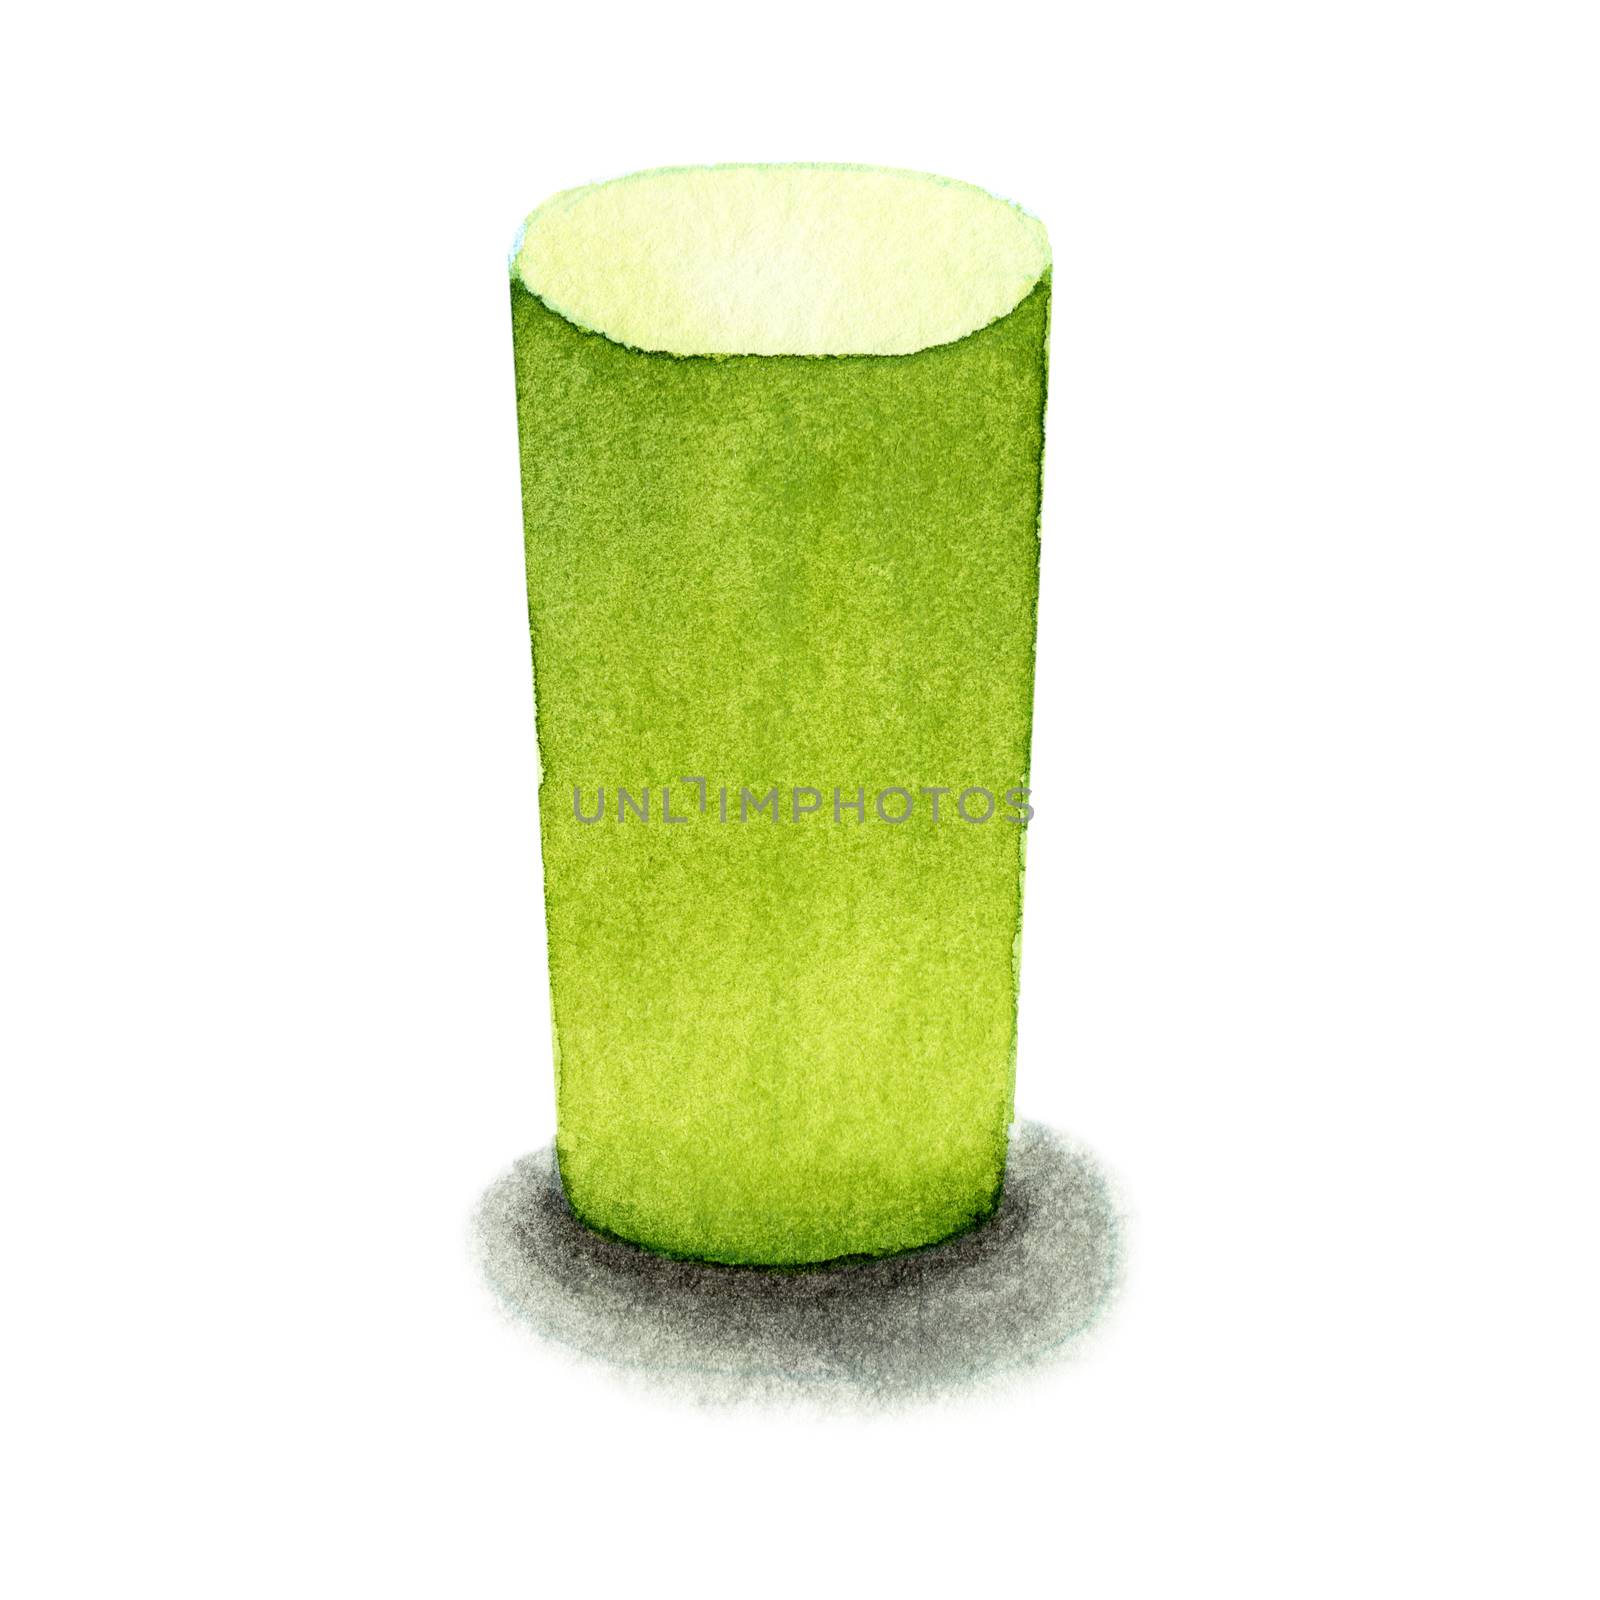 Green cylindrical , basic geometric shapes with dramatic light and shadow in watercolor style. Solids isolated on a white background. Clipping path.